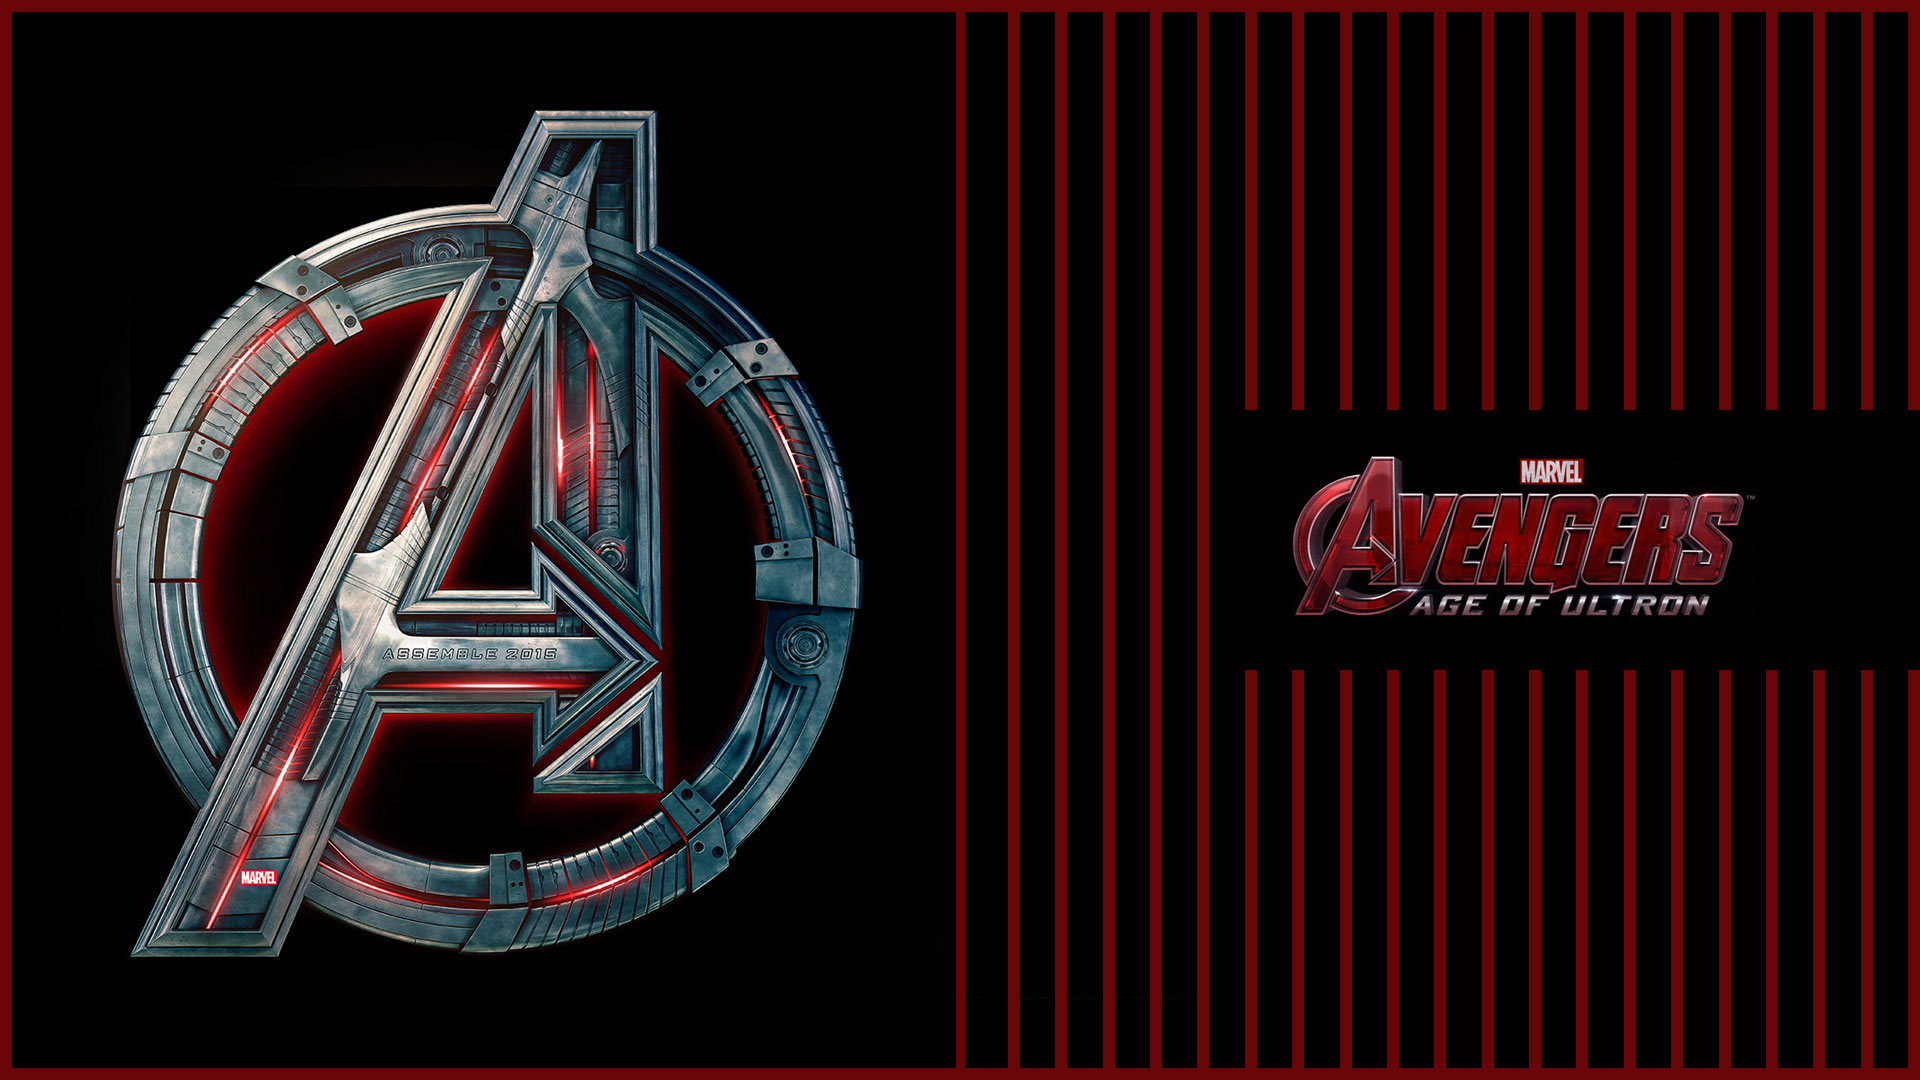 Avengers wallpapers for iPhone, iPad